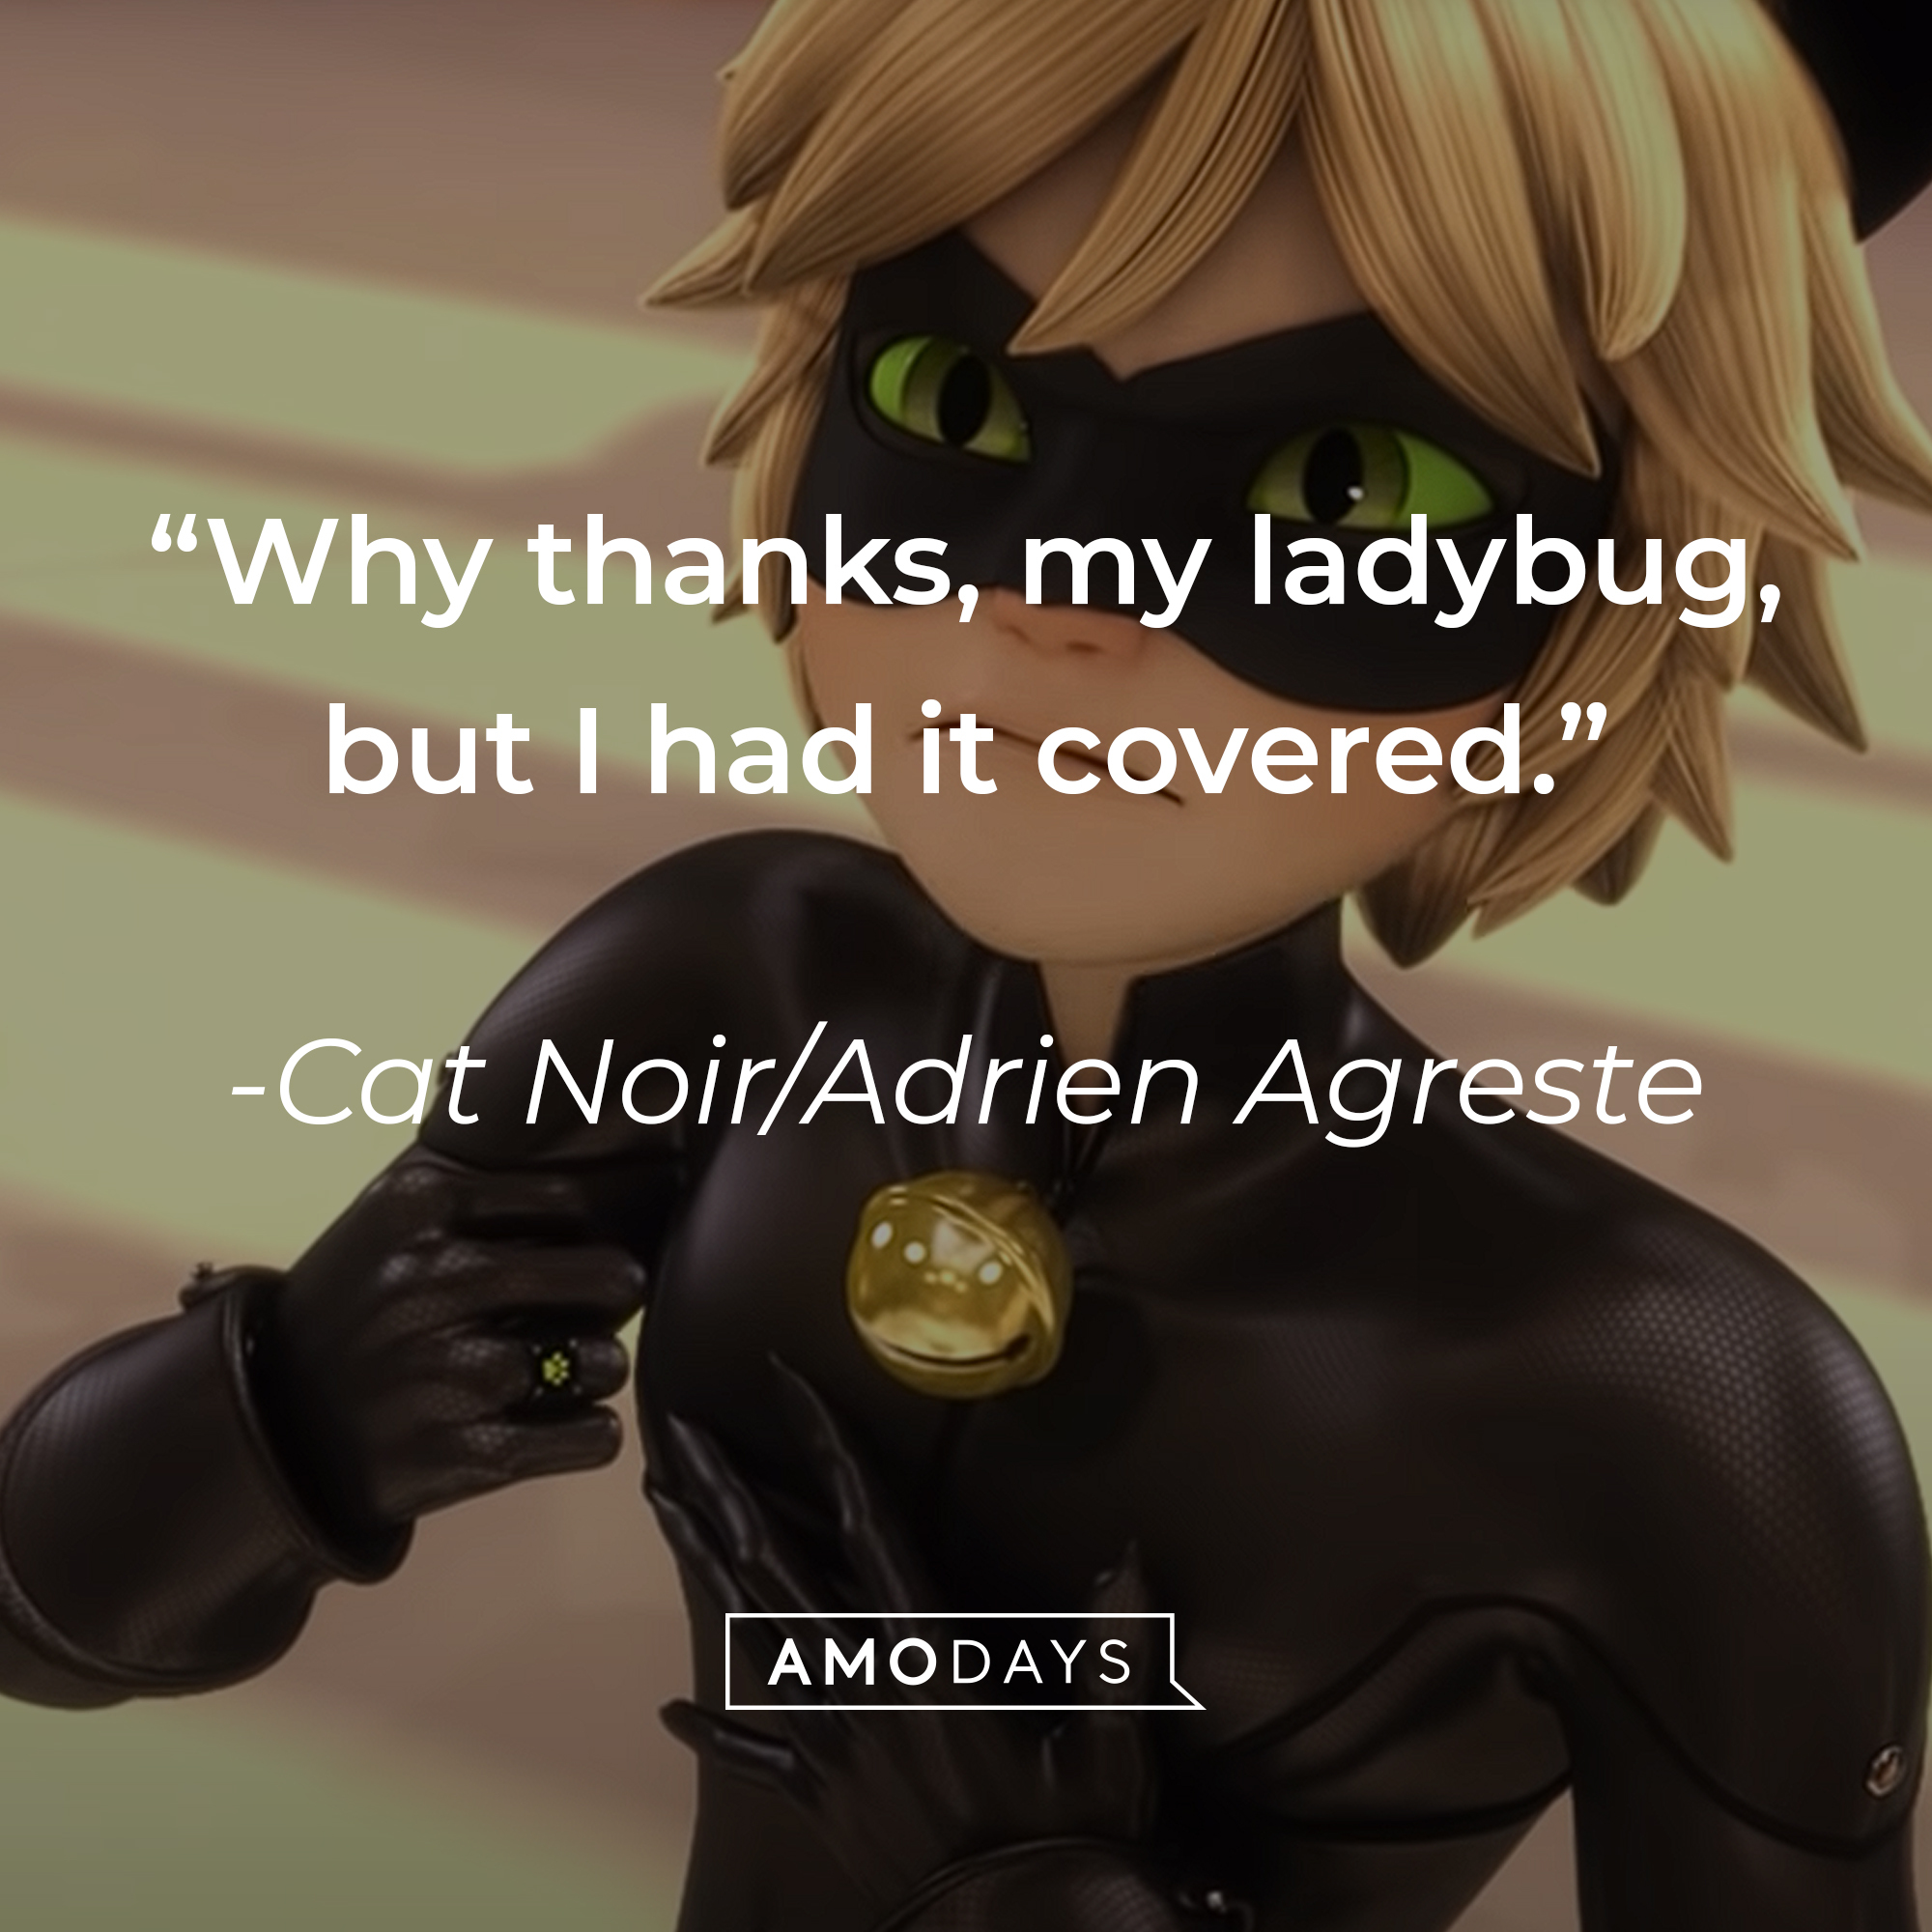 Cat Noir/Adrien Agreste’s quote: "Why thanks, my ladybug, but I had it covered.” | Image: AmoDays